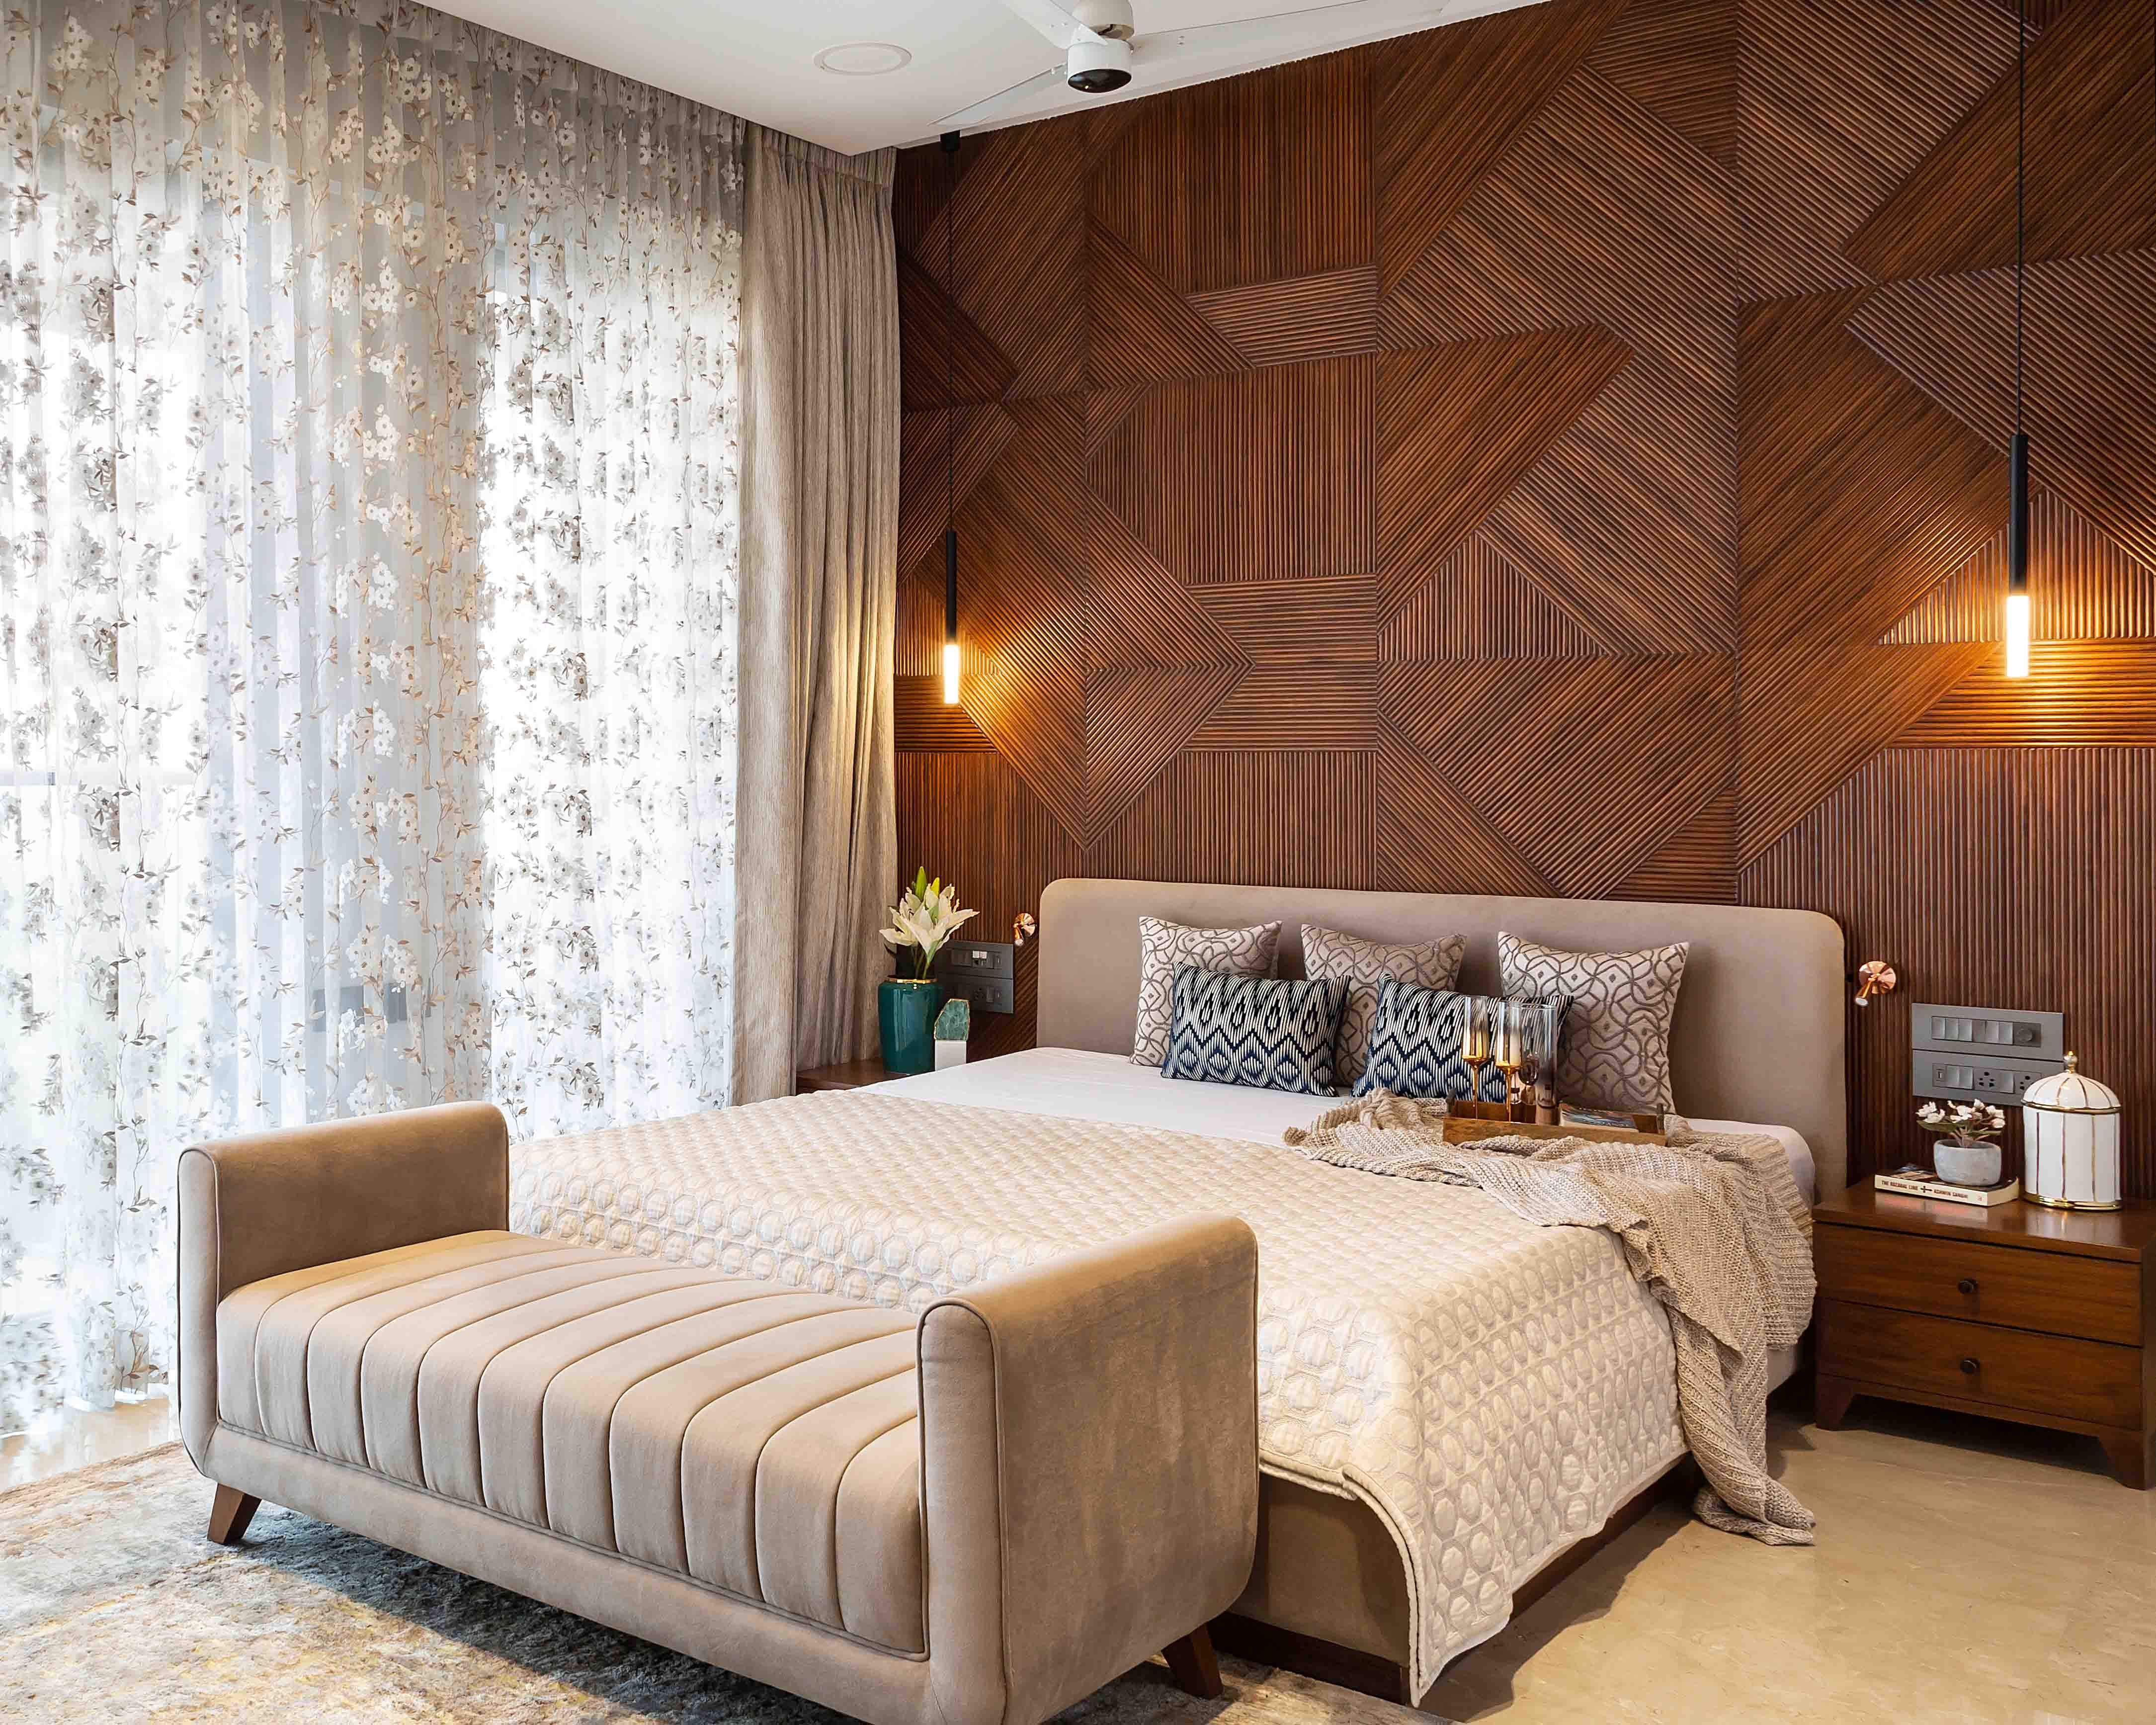 Modern Brown MDF Bedroom Wall Design With Wall Panelling And Solid Wood Accents